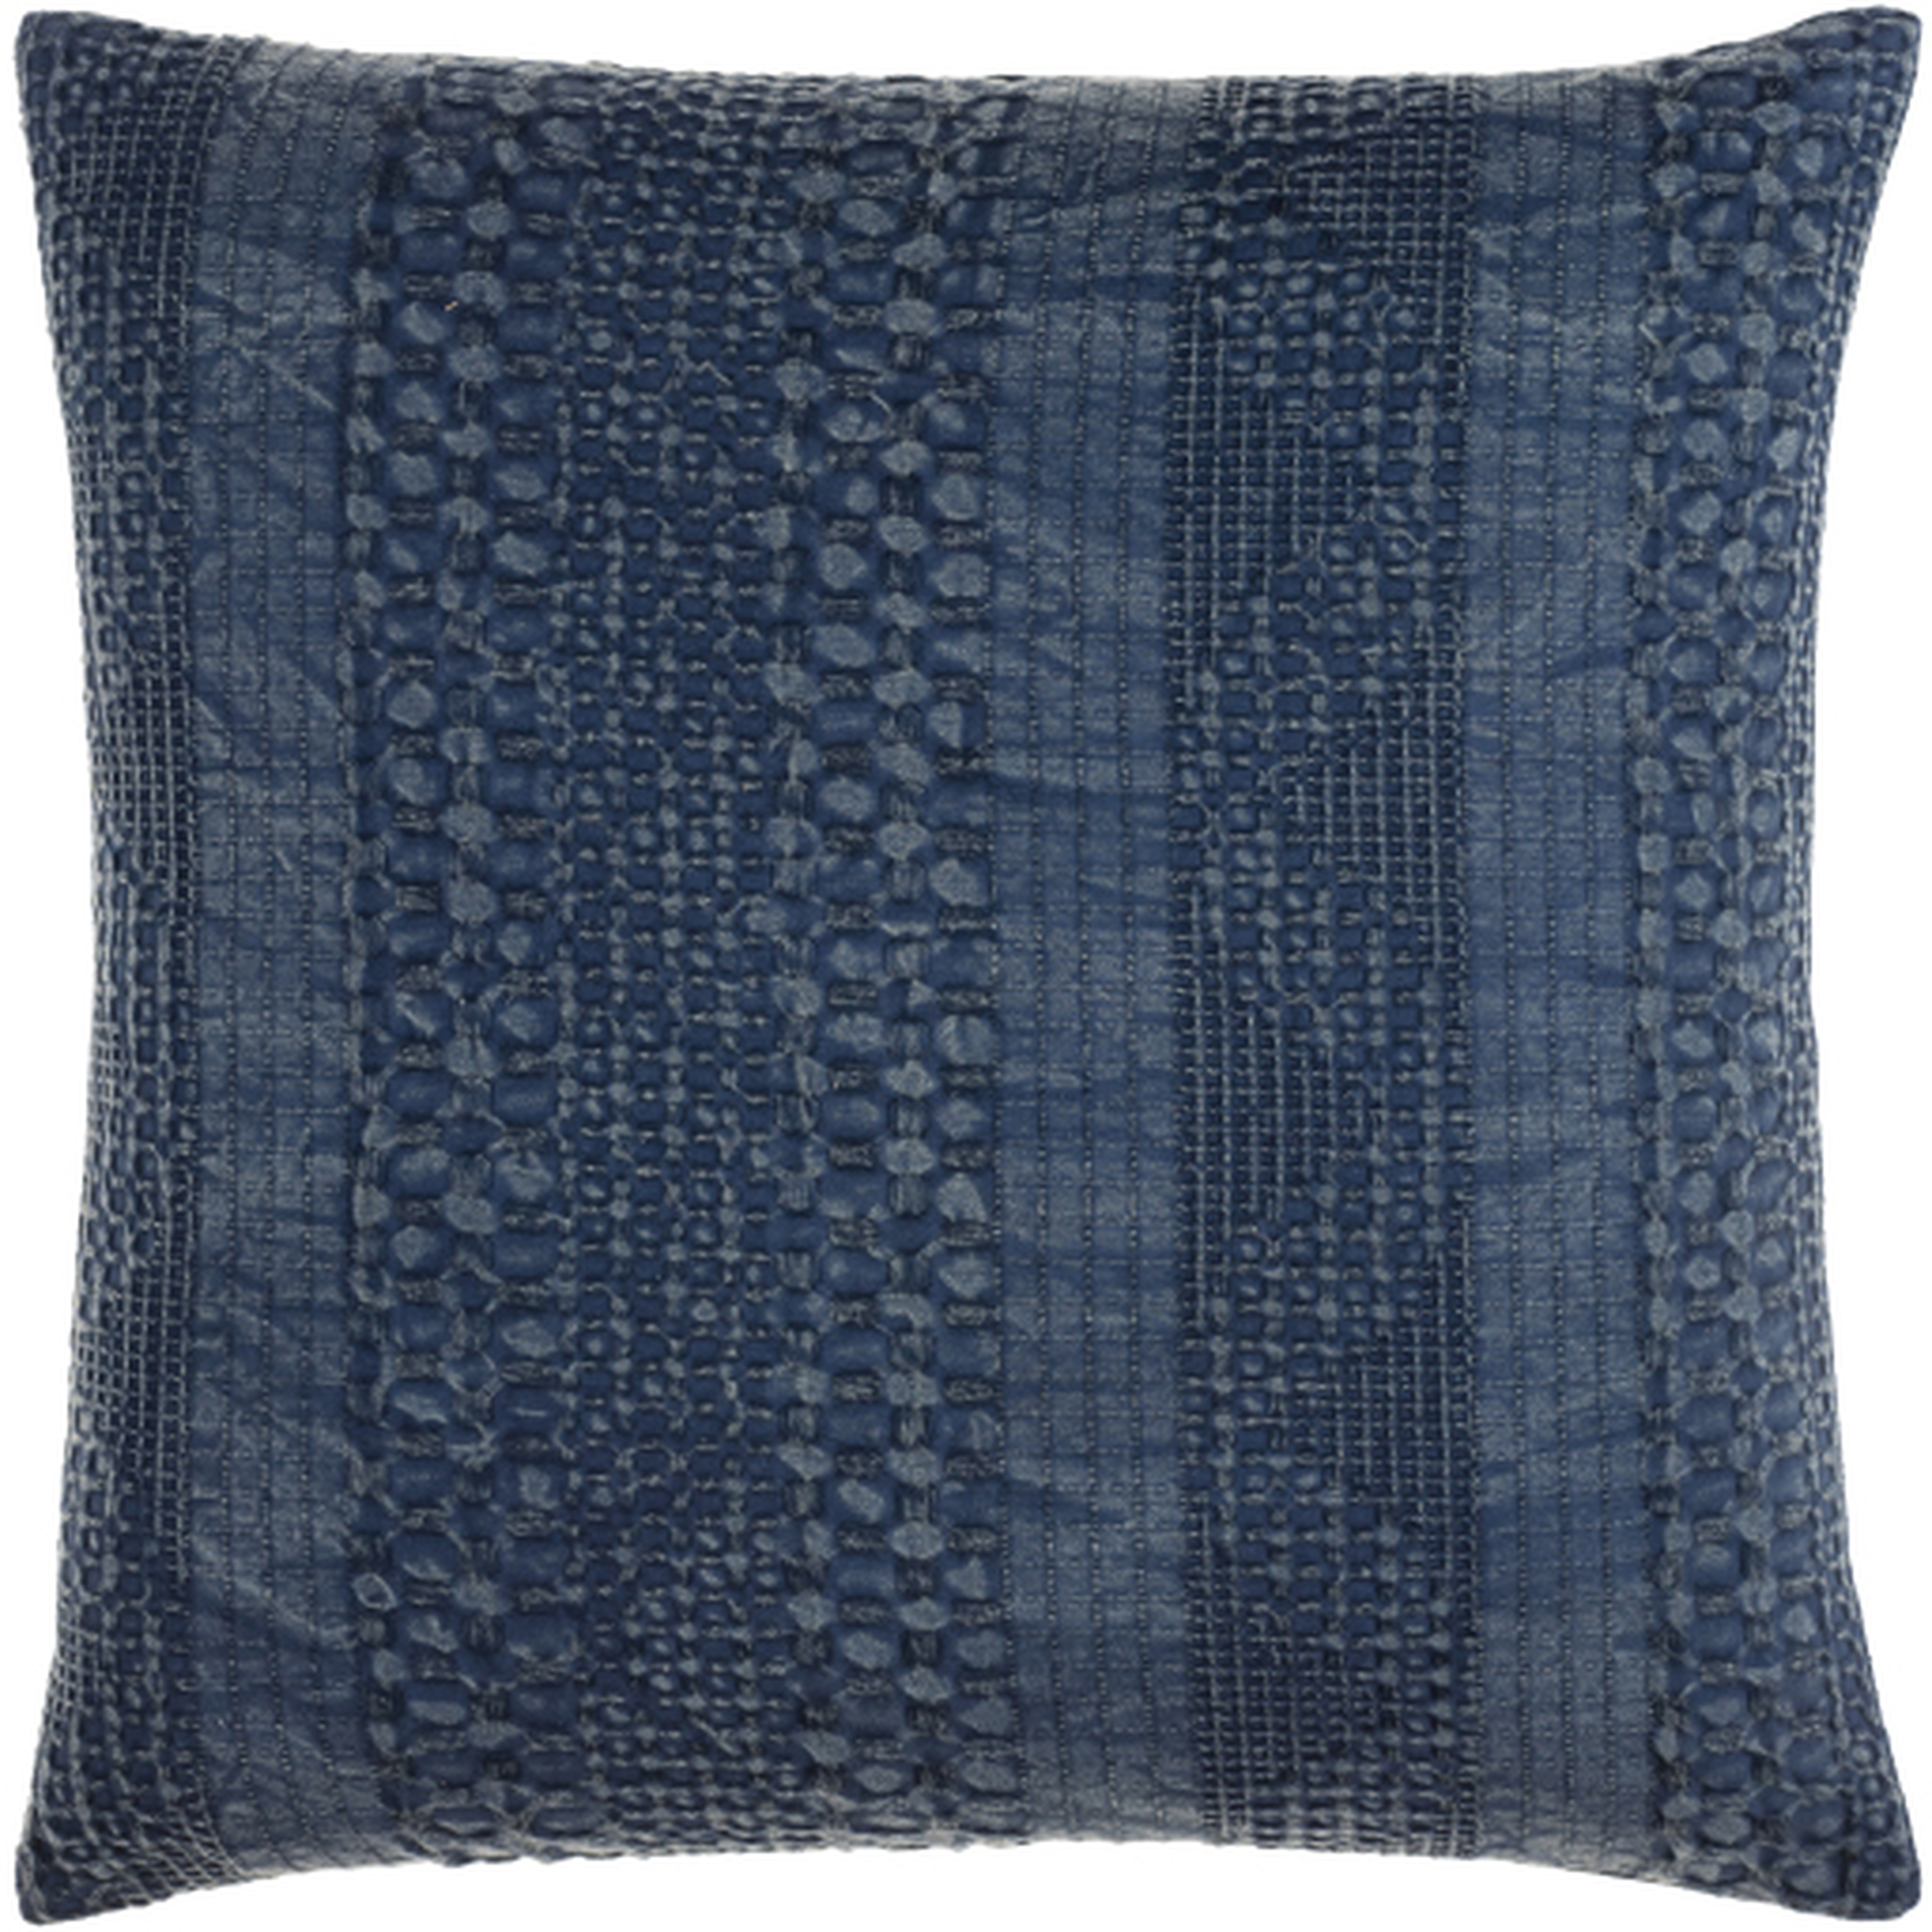 Washed Waffle Throw Pillow, 18" x 18", with poly insert - Surya